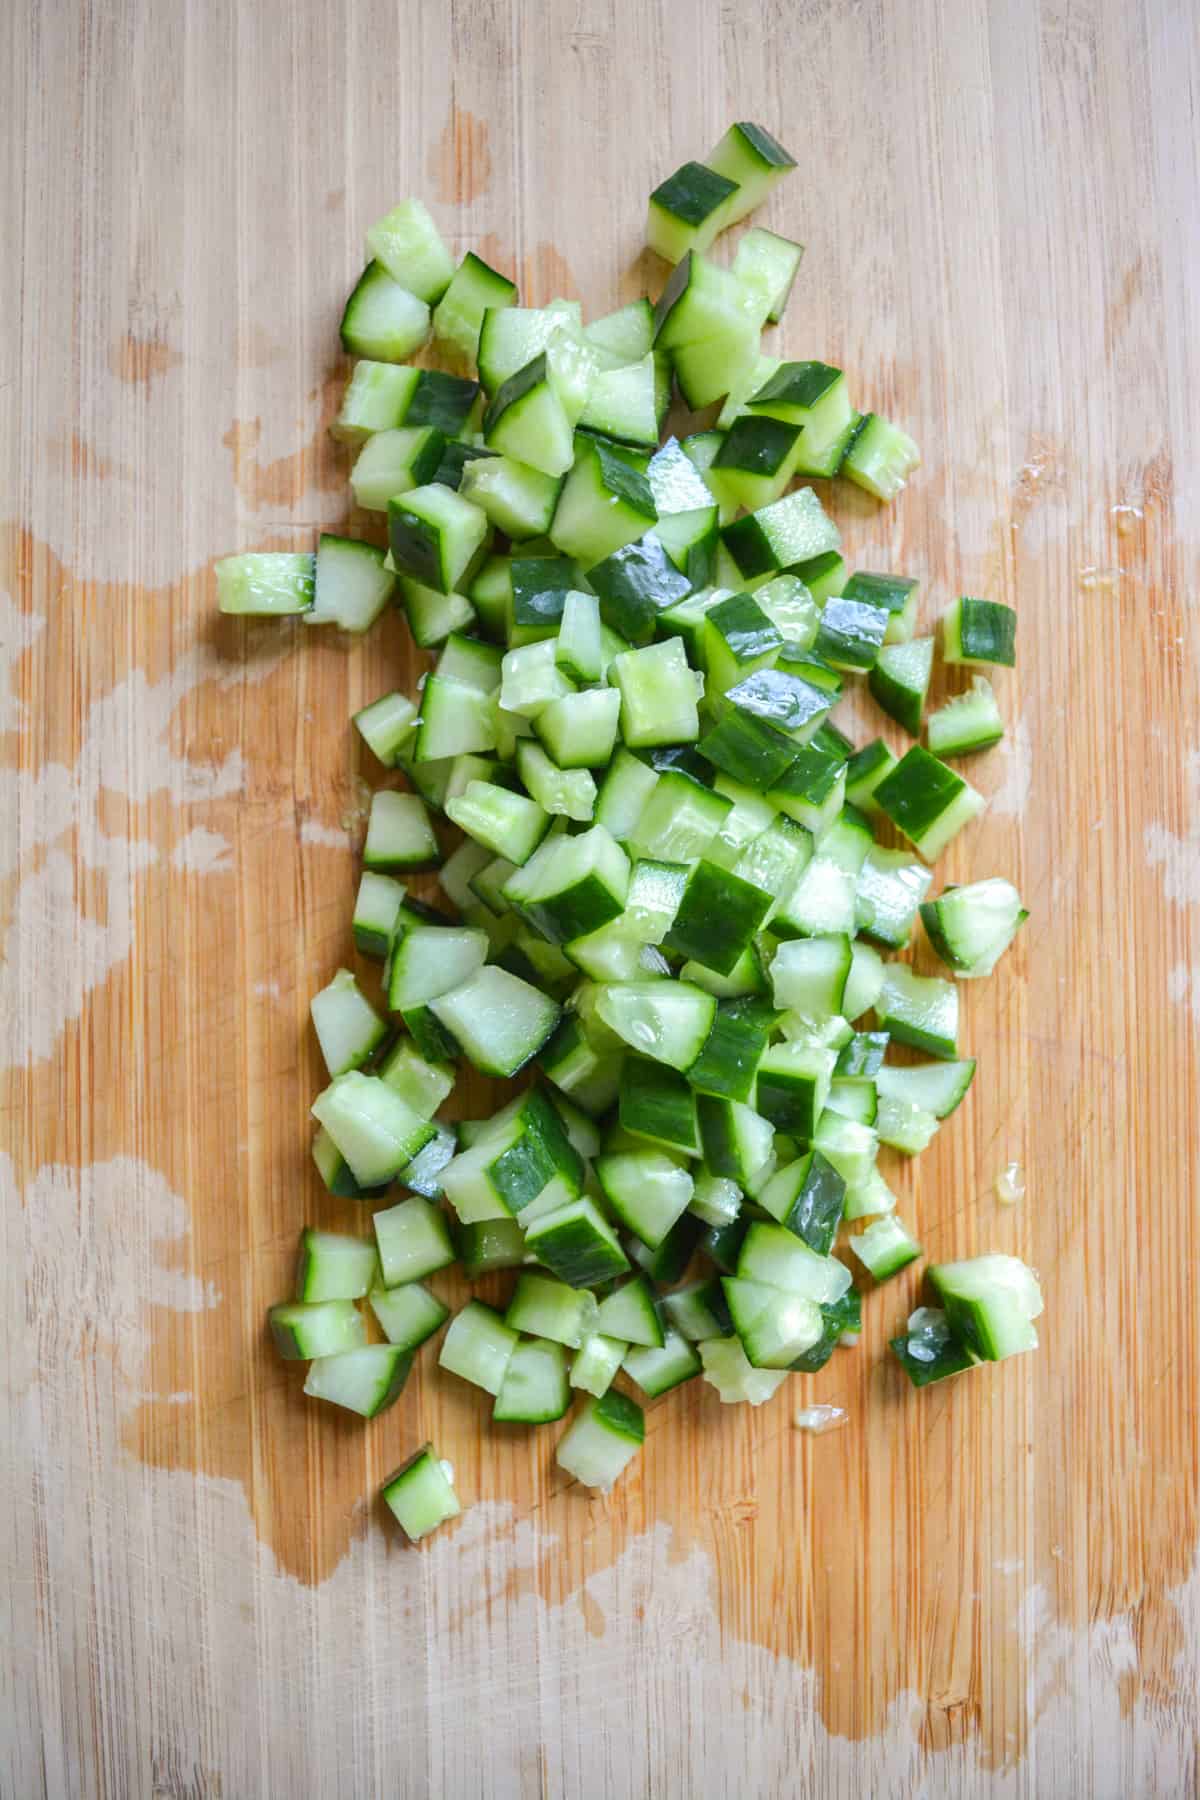 Diced english cucumber on a wooden cutting board.